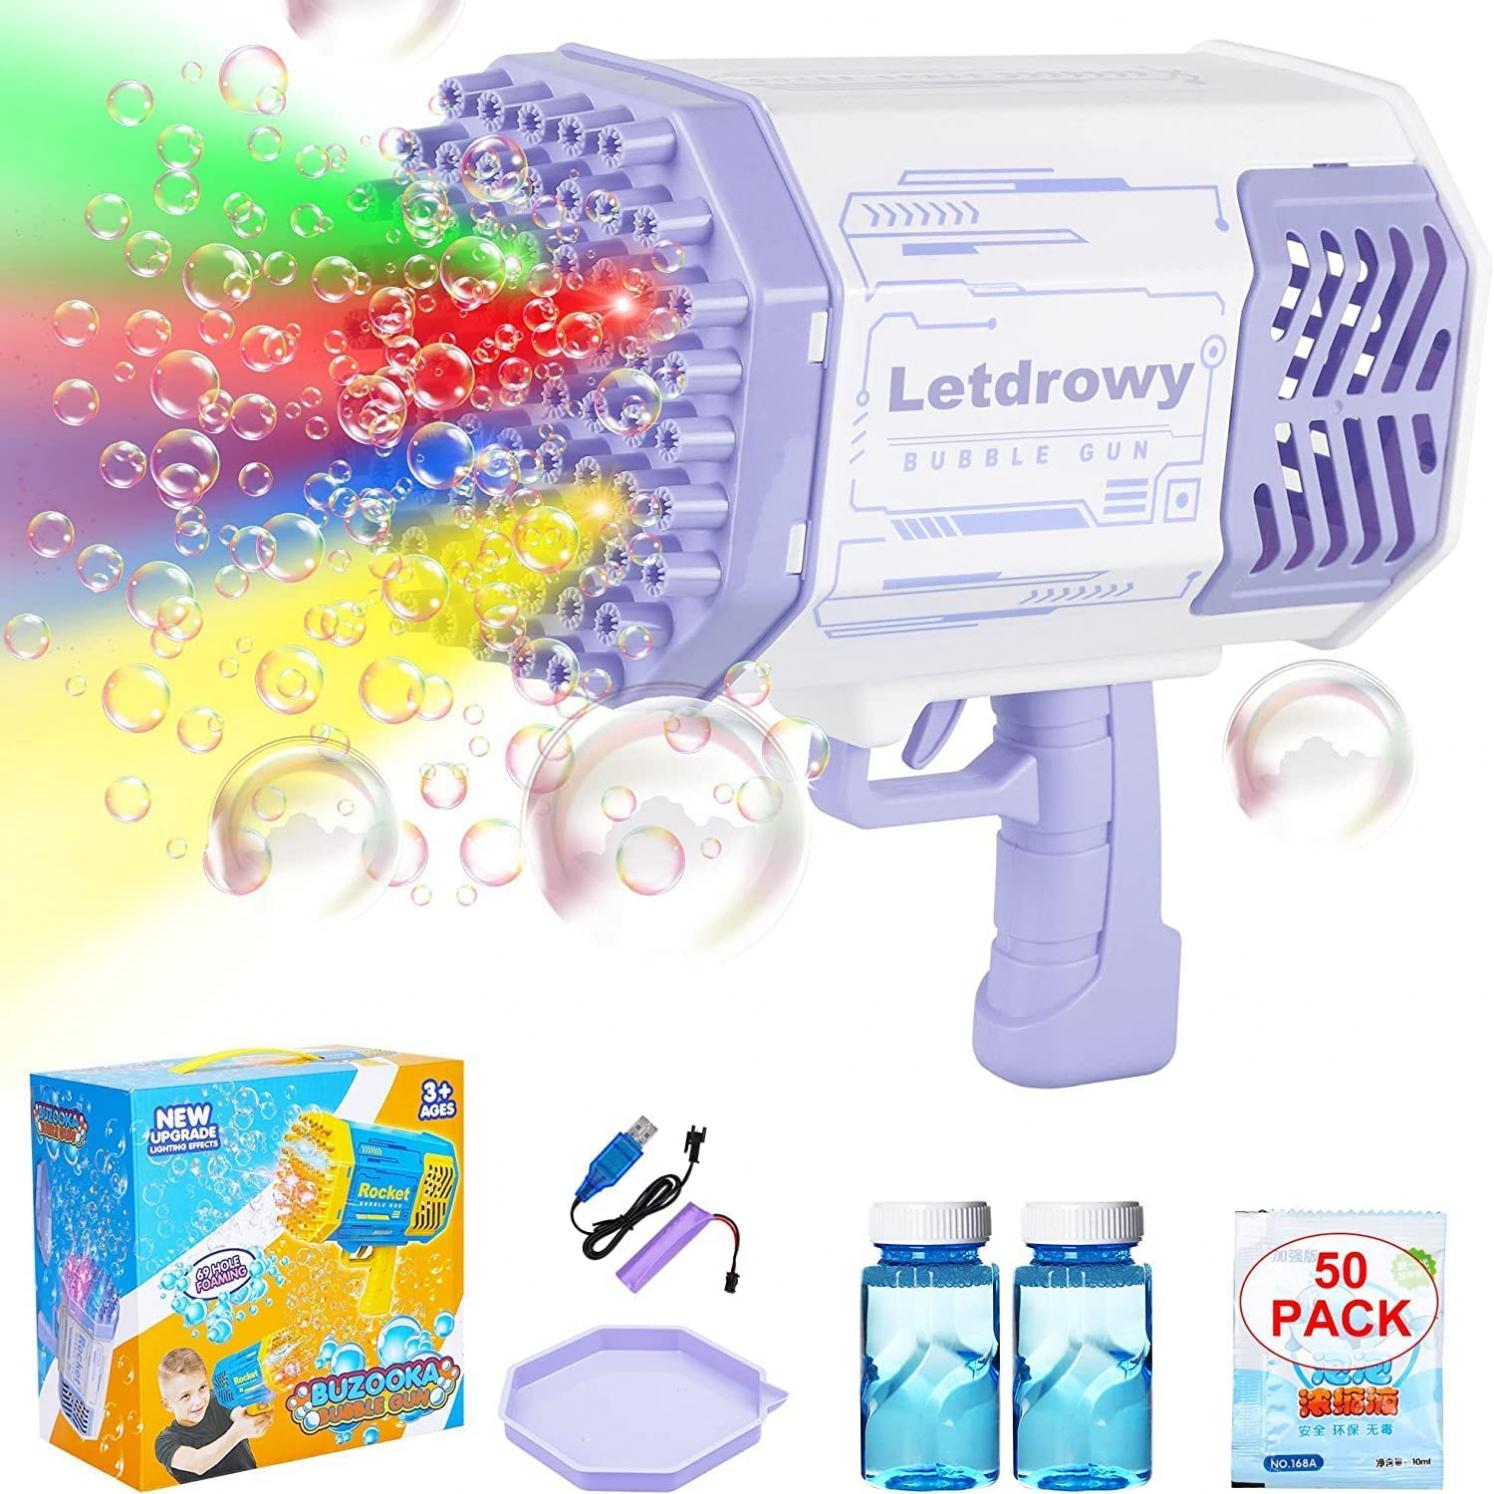 69 Hole Bubble Gun with 20.28OZ Bubble Solution - Letdrowy Bubble Machine Gun for Kids,Bubble Blower Machine,Big Bubble Machine for Parties,Birthday Gifts,Christmas.